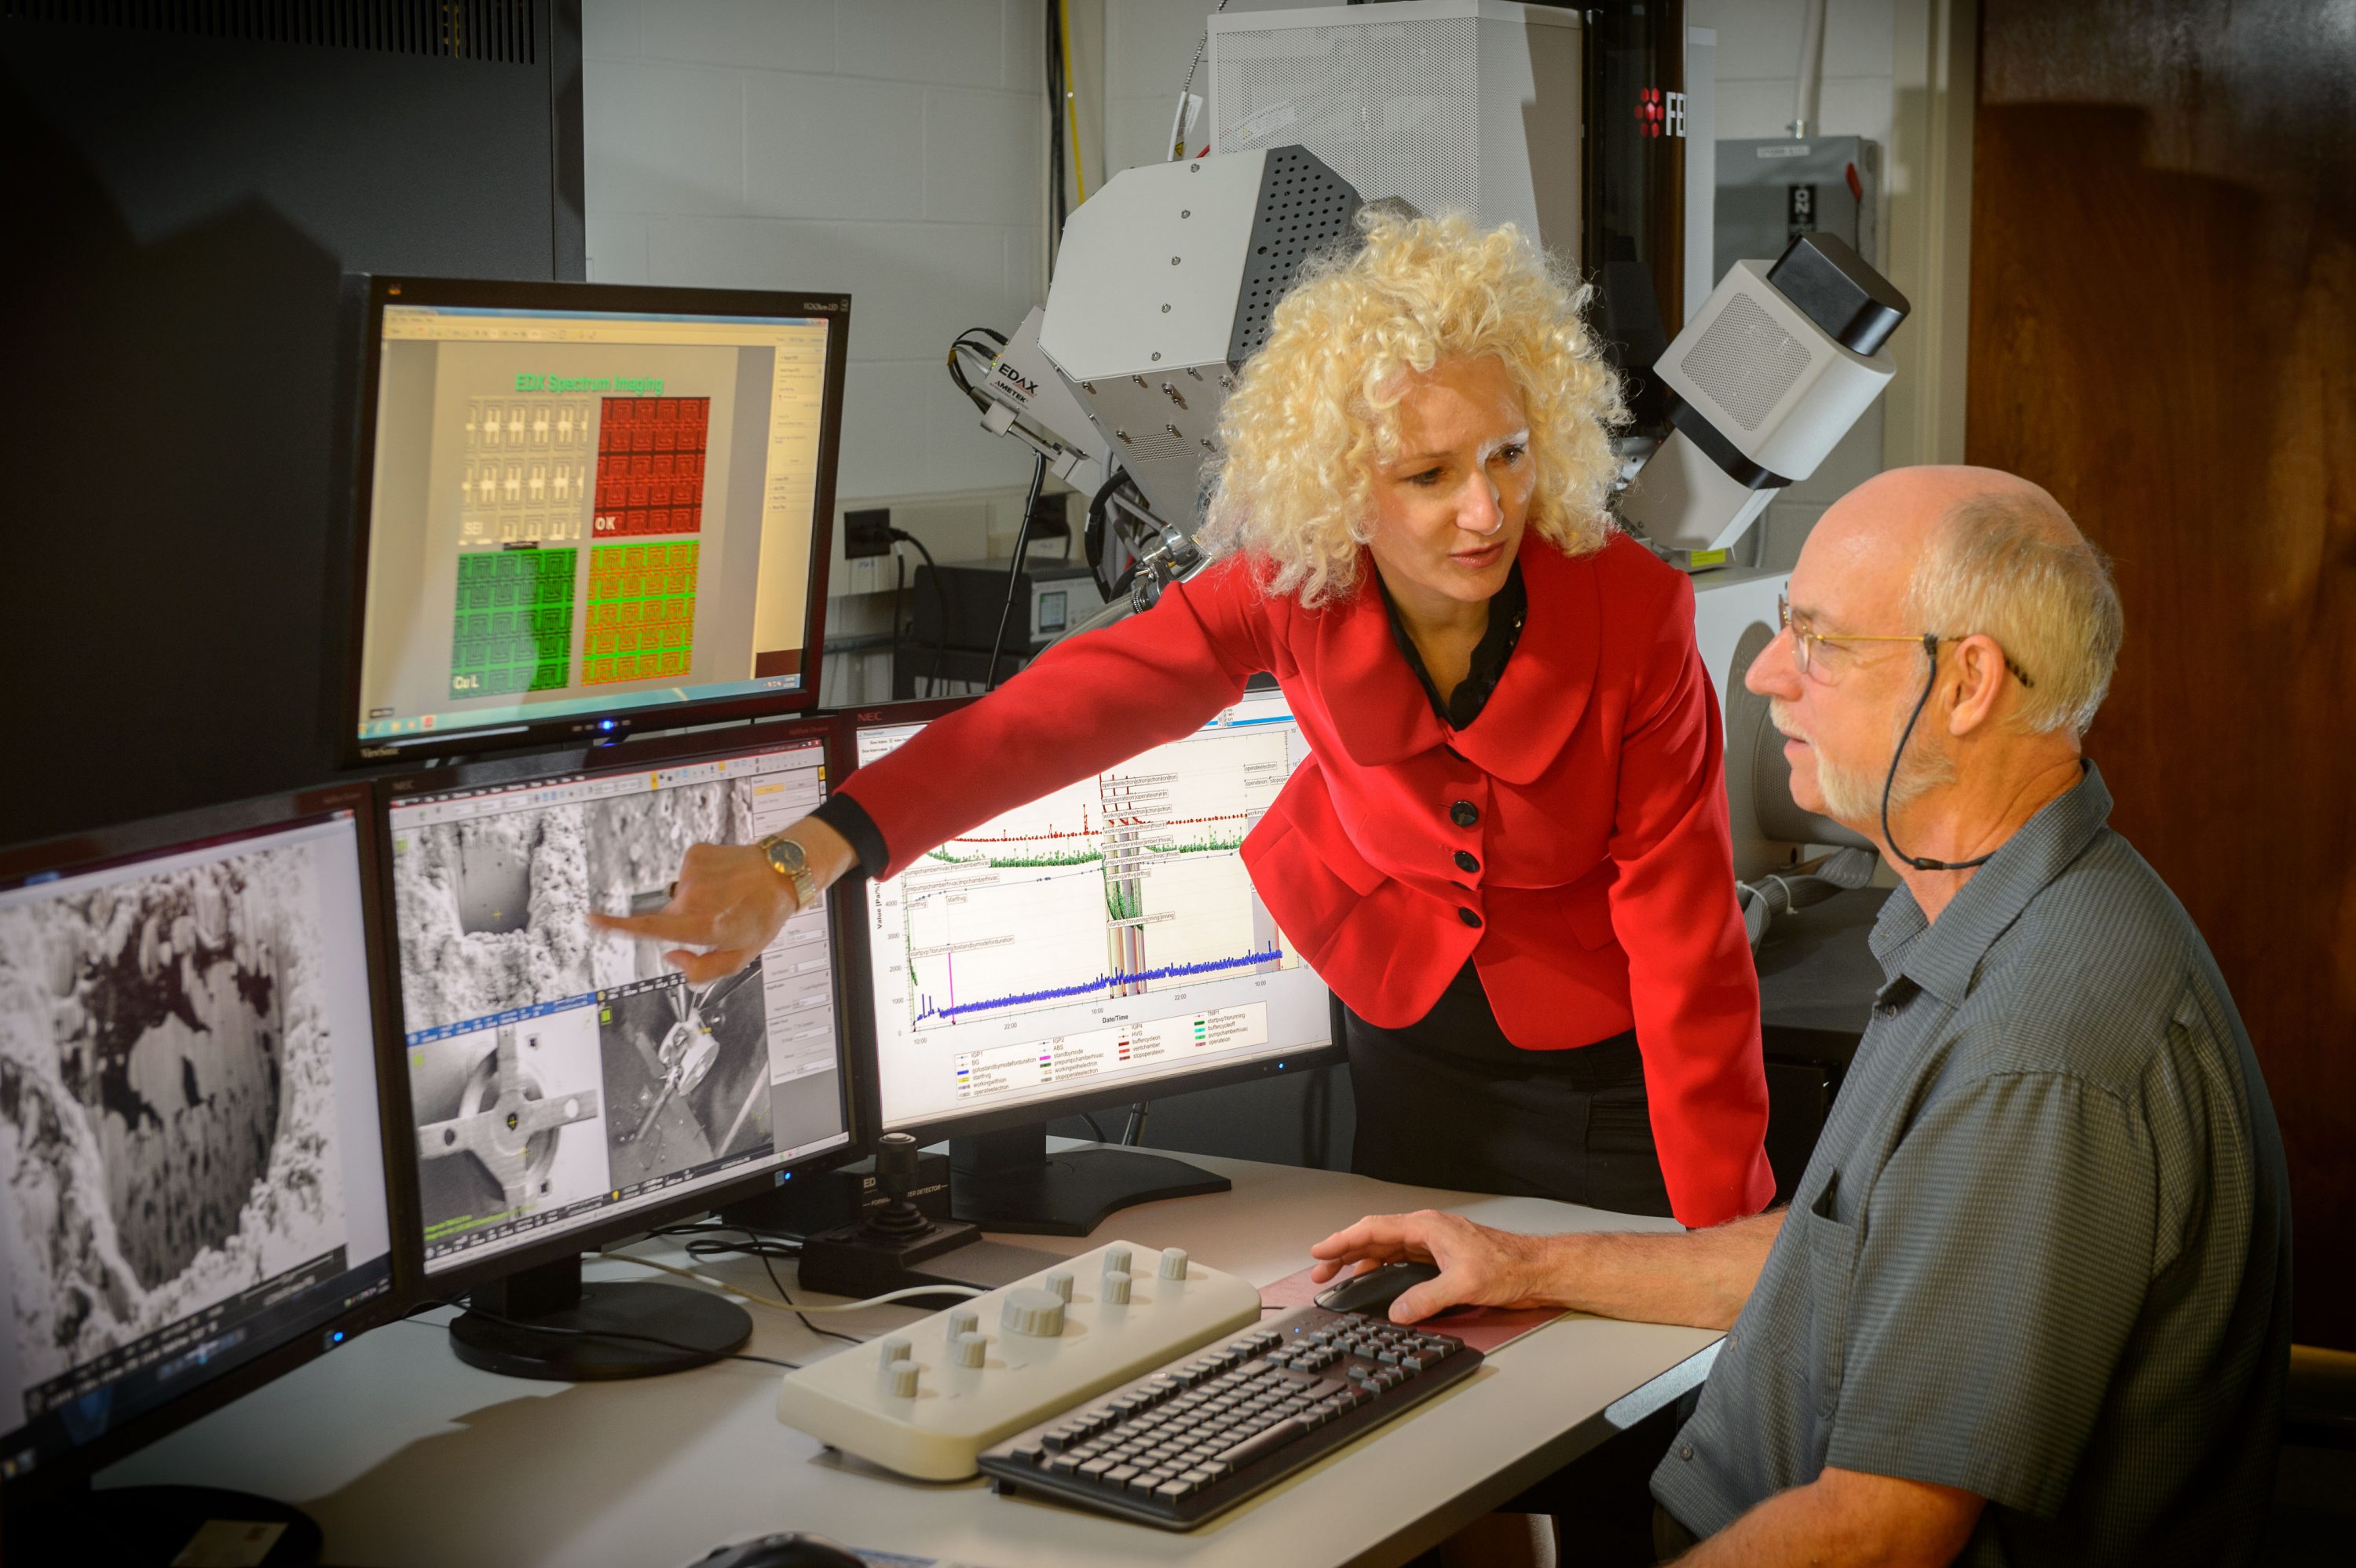 Radenka Maric, executive director of Tech Park, speaks with Roger Ristau, manager of the UConn-FEI Center for Advanced Microscopy and Materials Analysis. (Peter Morenus/UConn Photo)